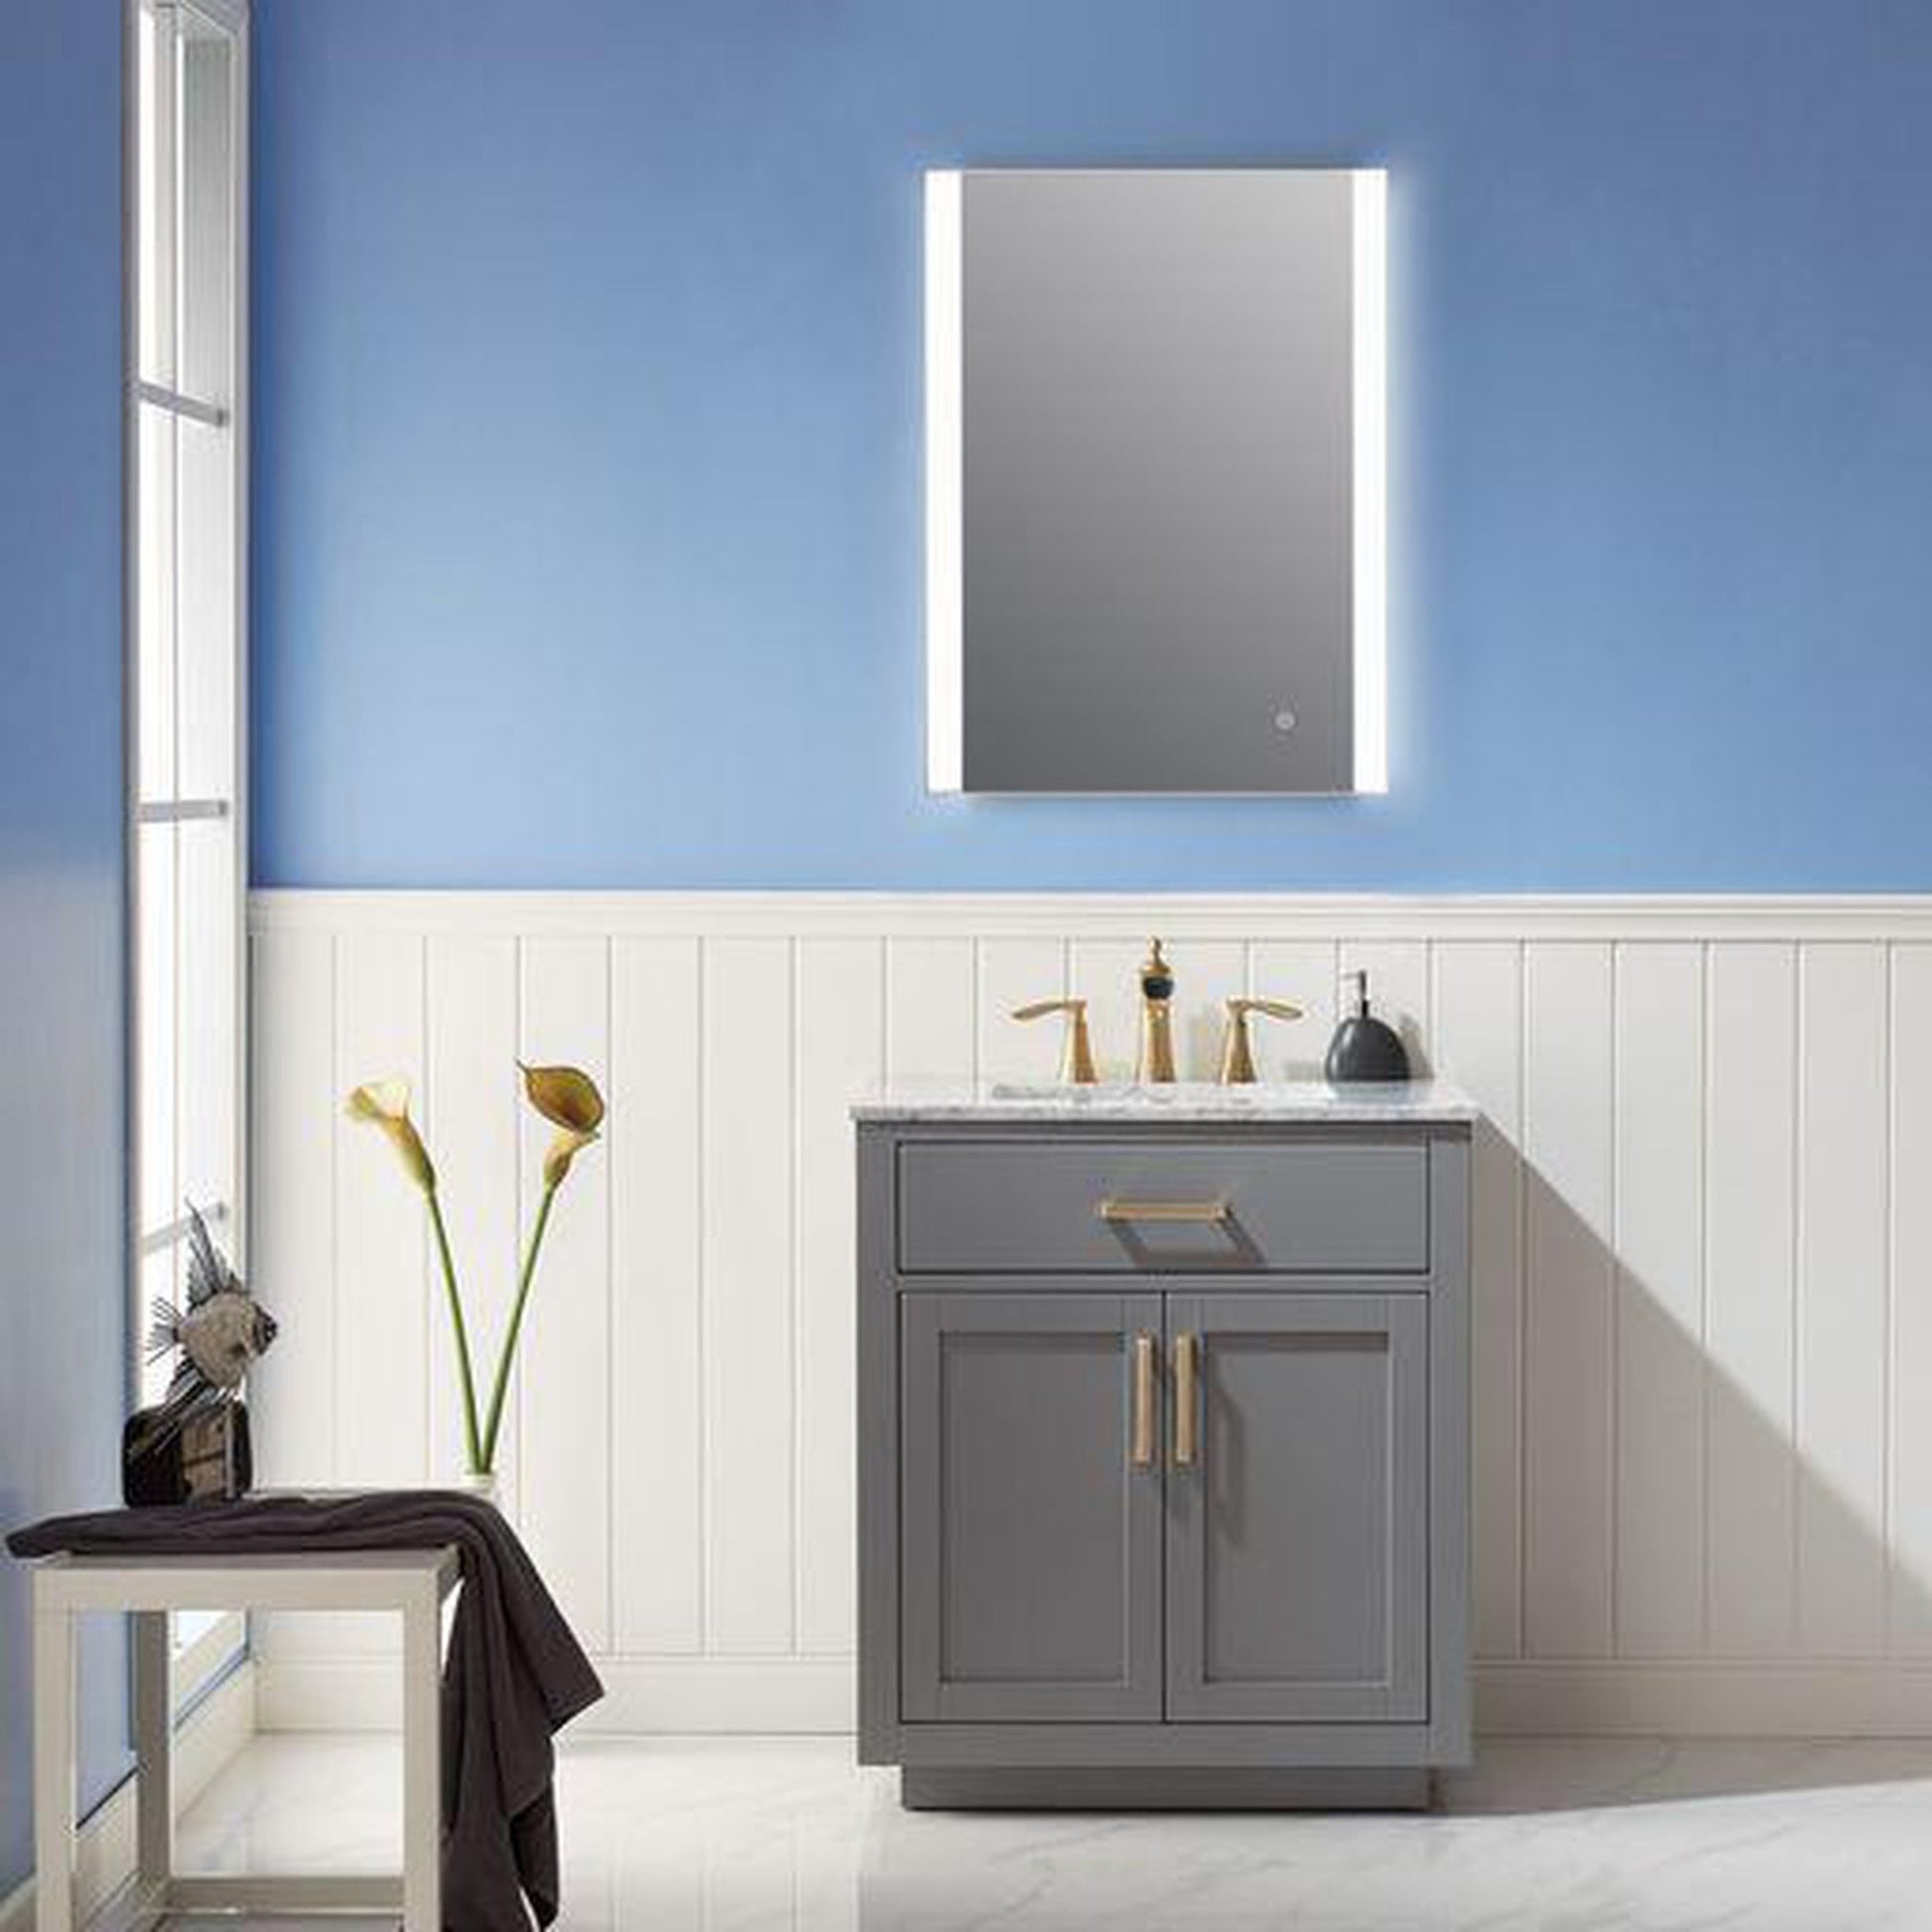 Altair Cosenza 24" Rectangle Acrylic Frame Wall-Mounted LED Mirror